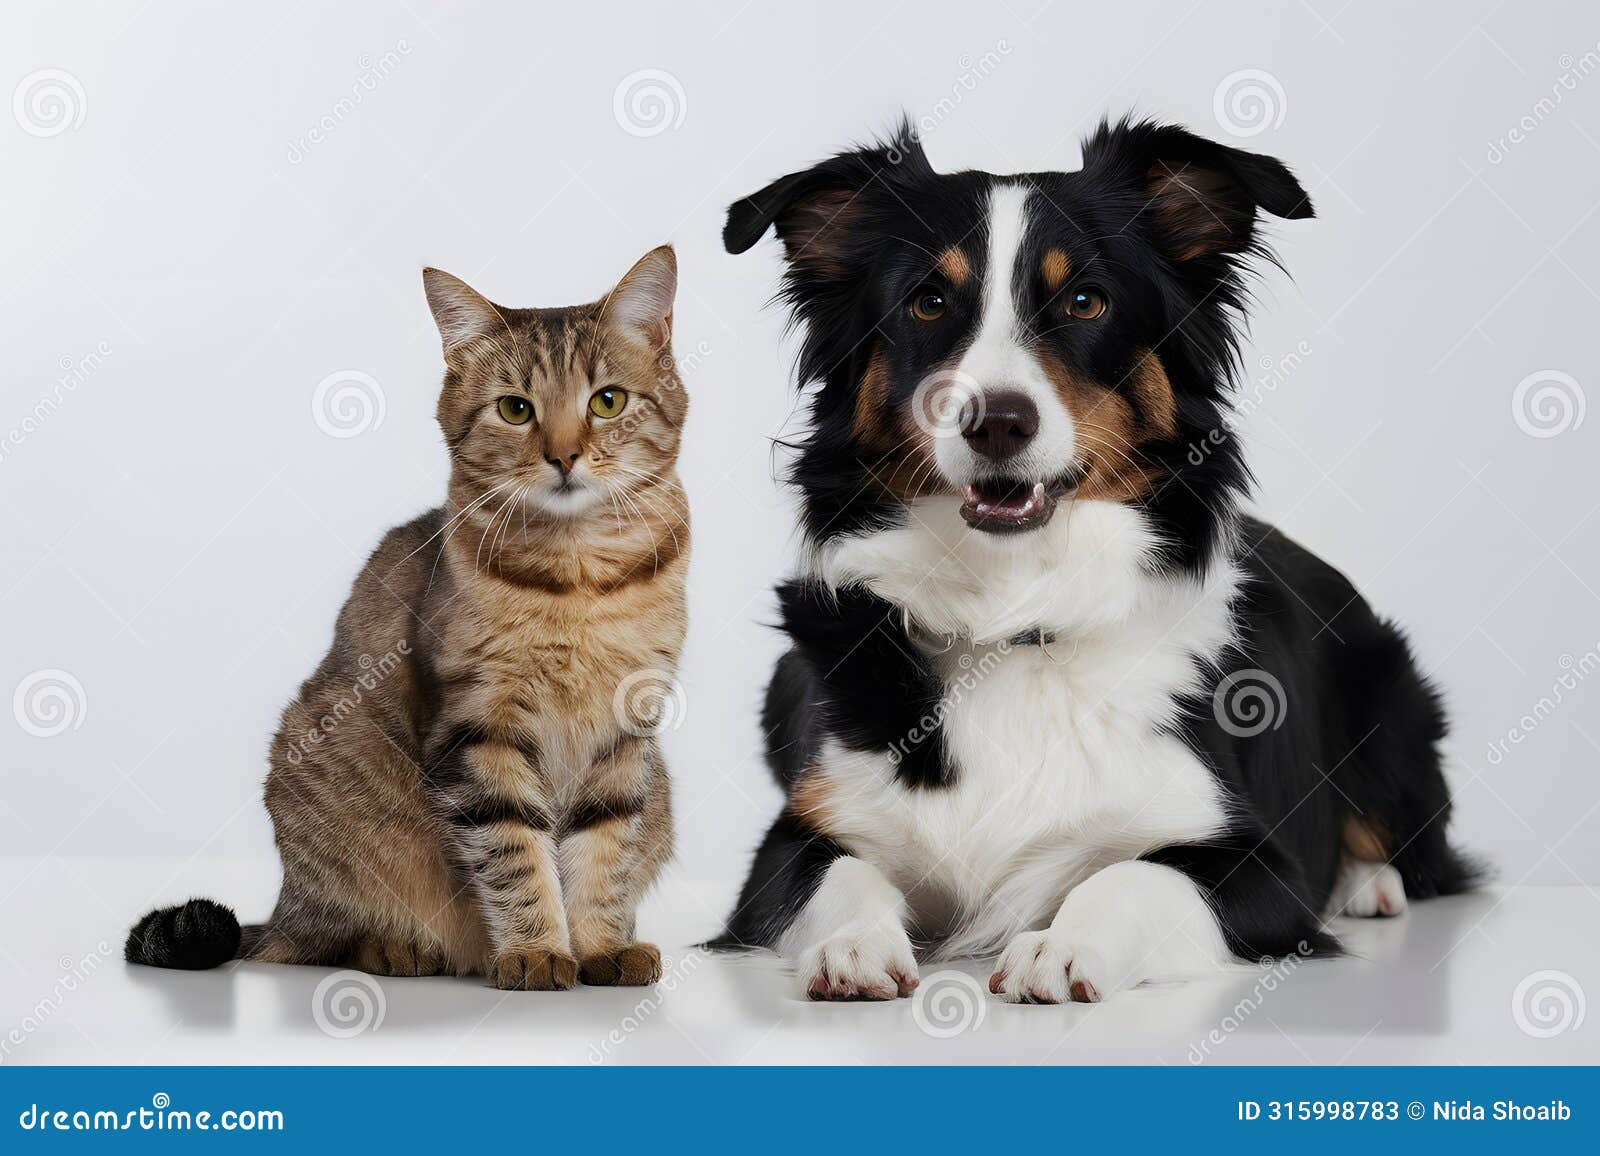 curious cat and border collie dog pose together, exuding charm and friendliness